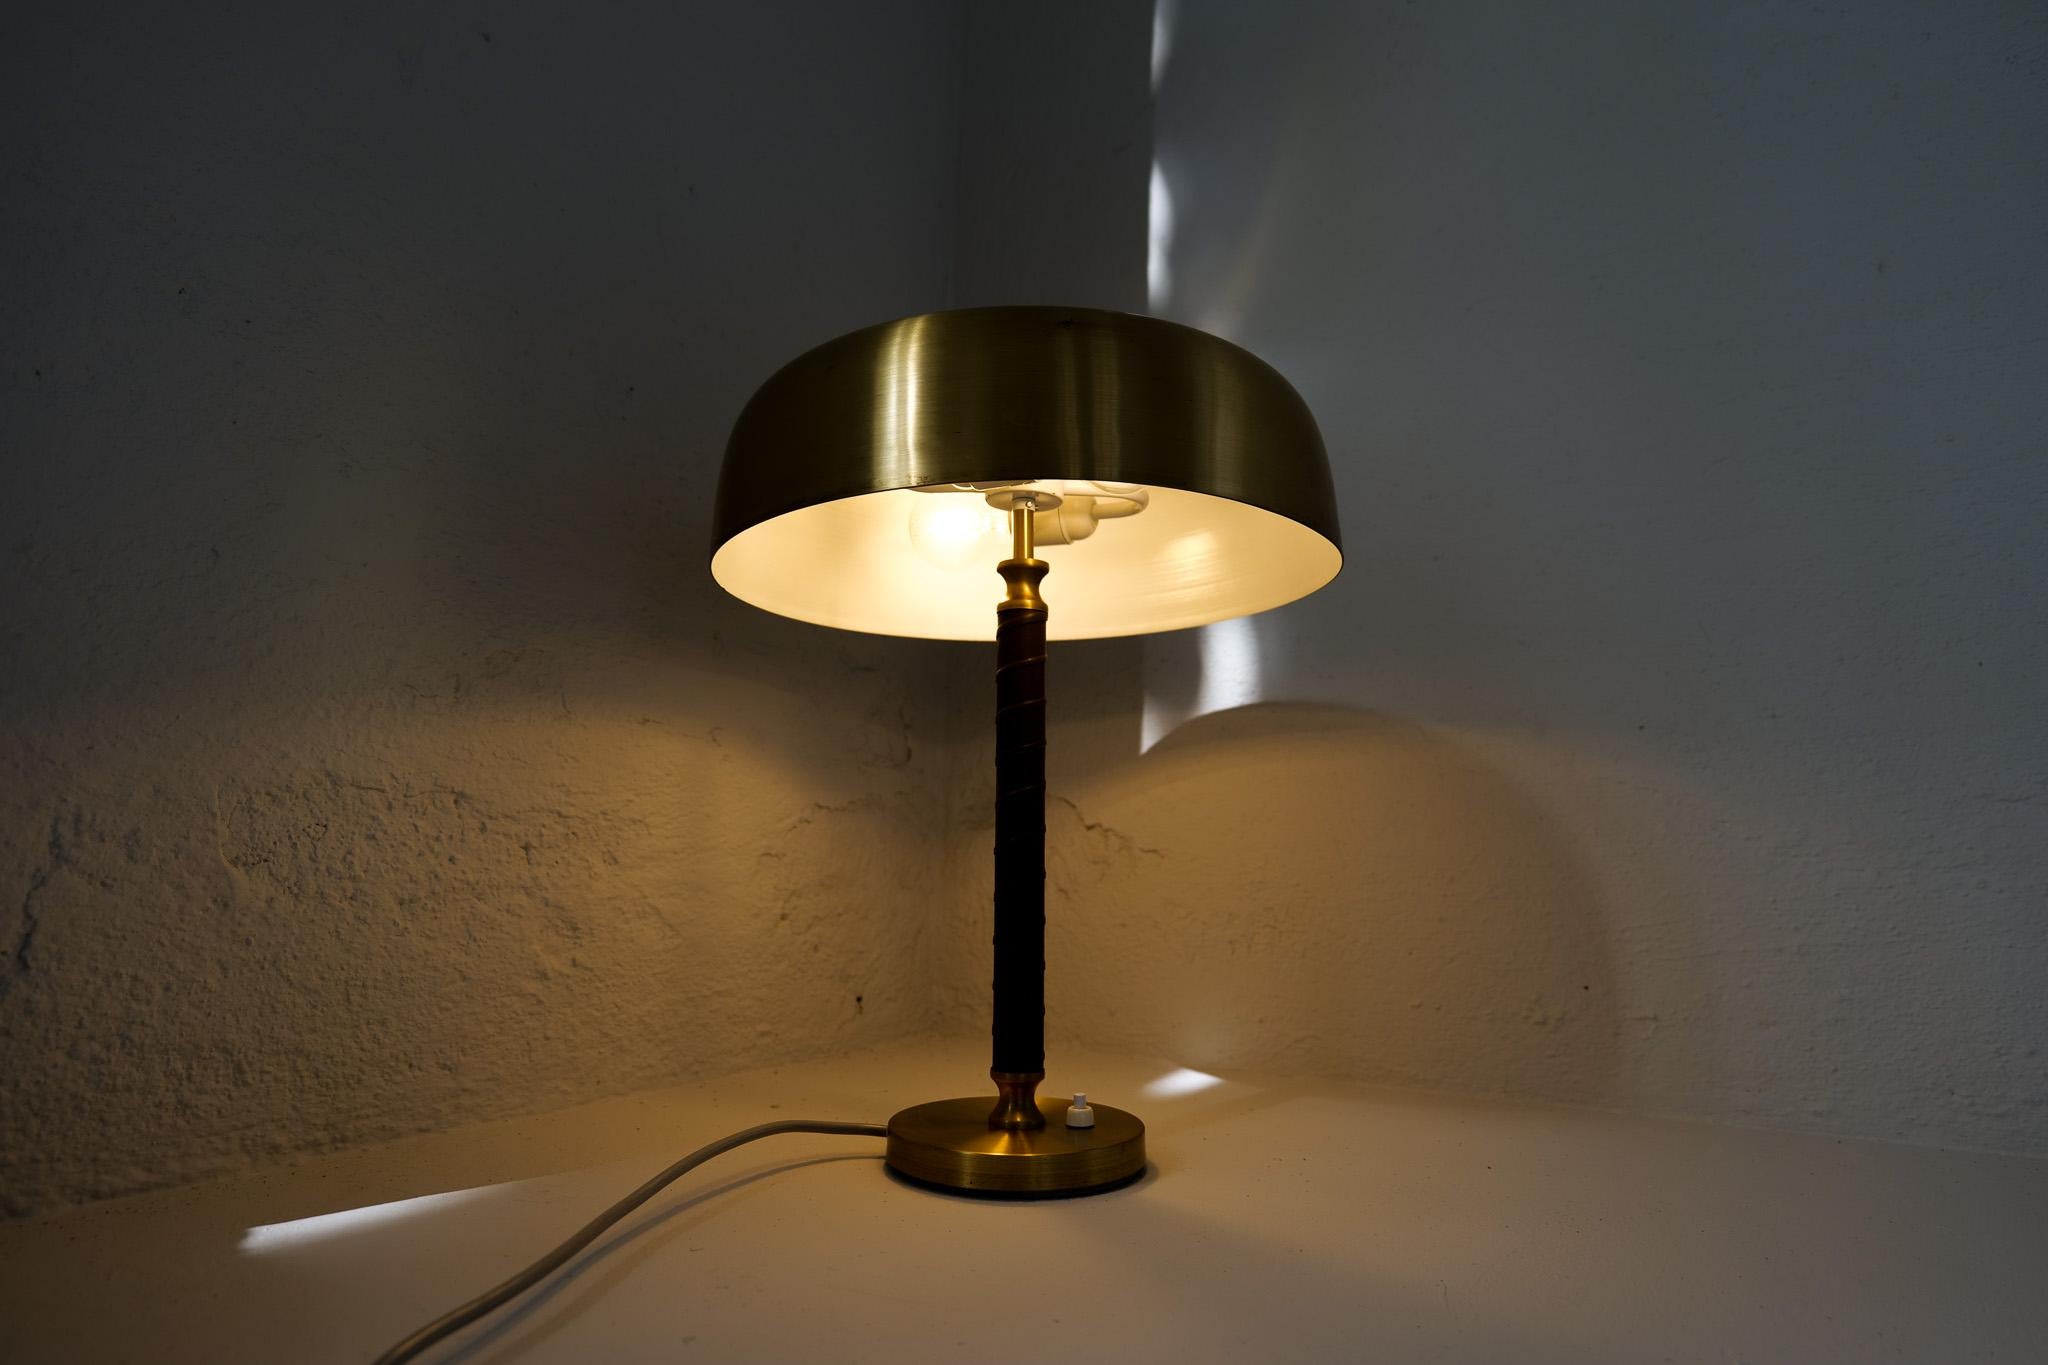 Midcentury Modern Table Lamp in Brass and Leather by Boréns, Sweden, 1960s For Sale 6